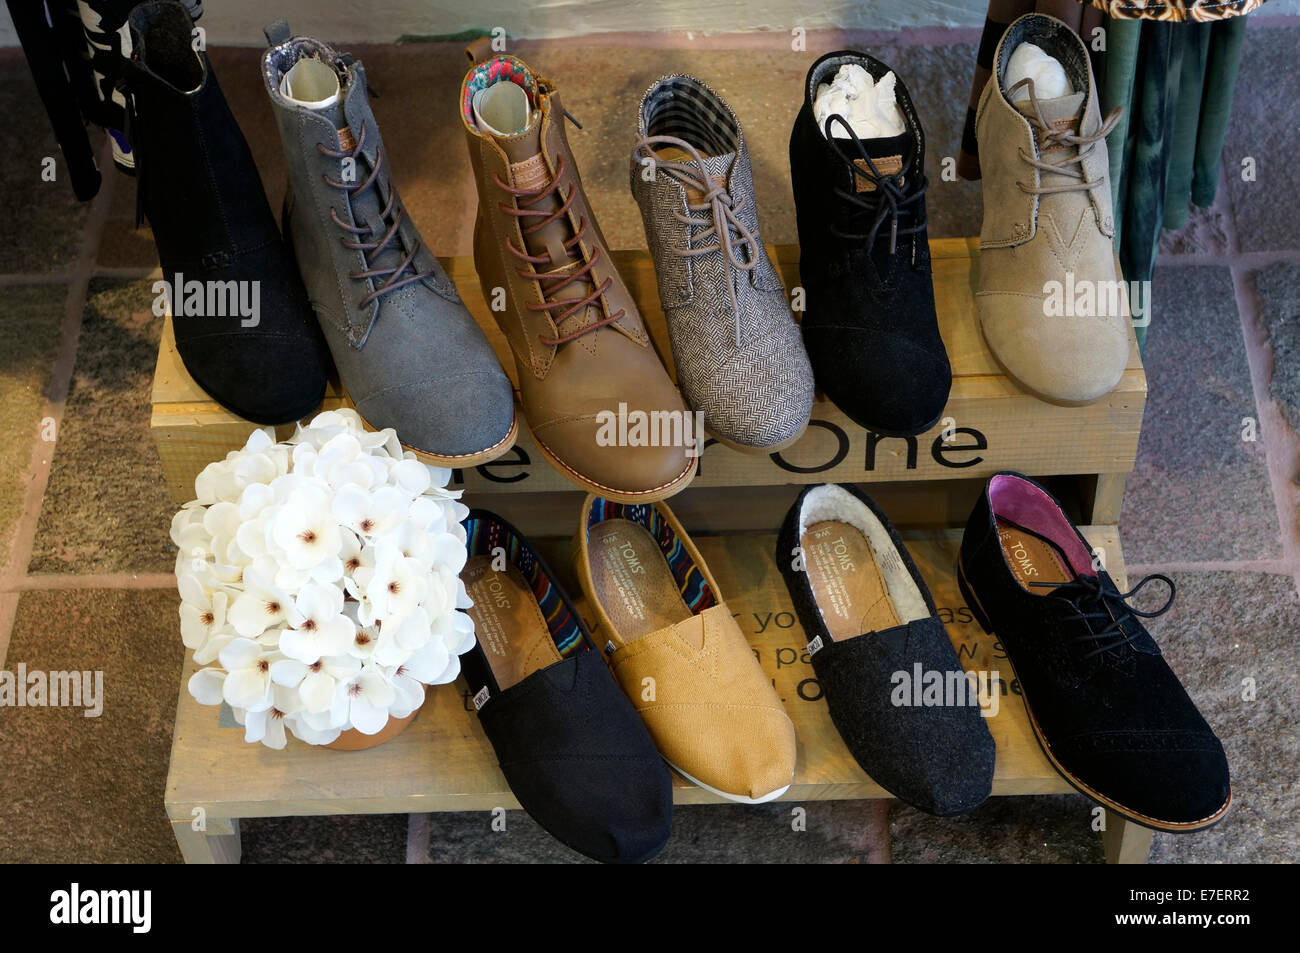 Stylish women's casual boots and shoes for sale in a store Stock Photo